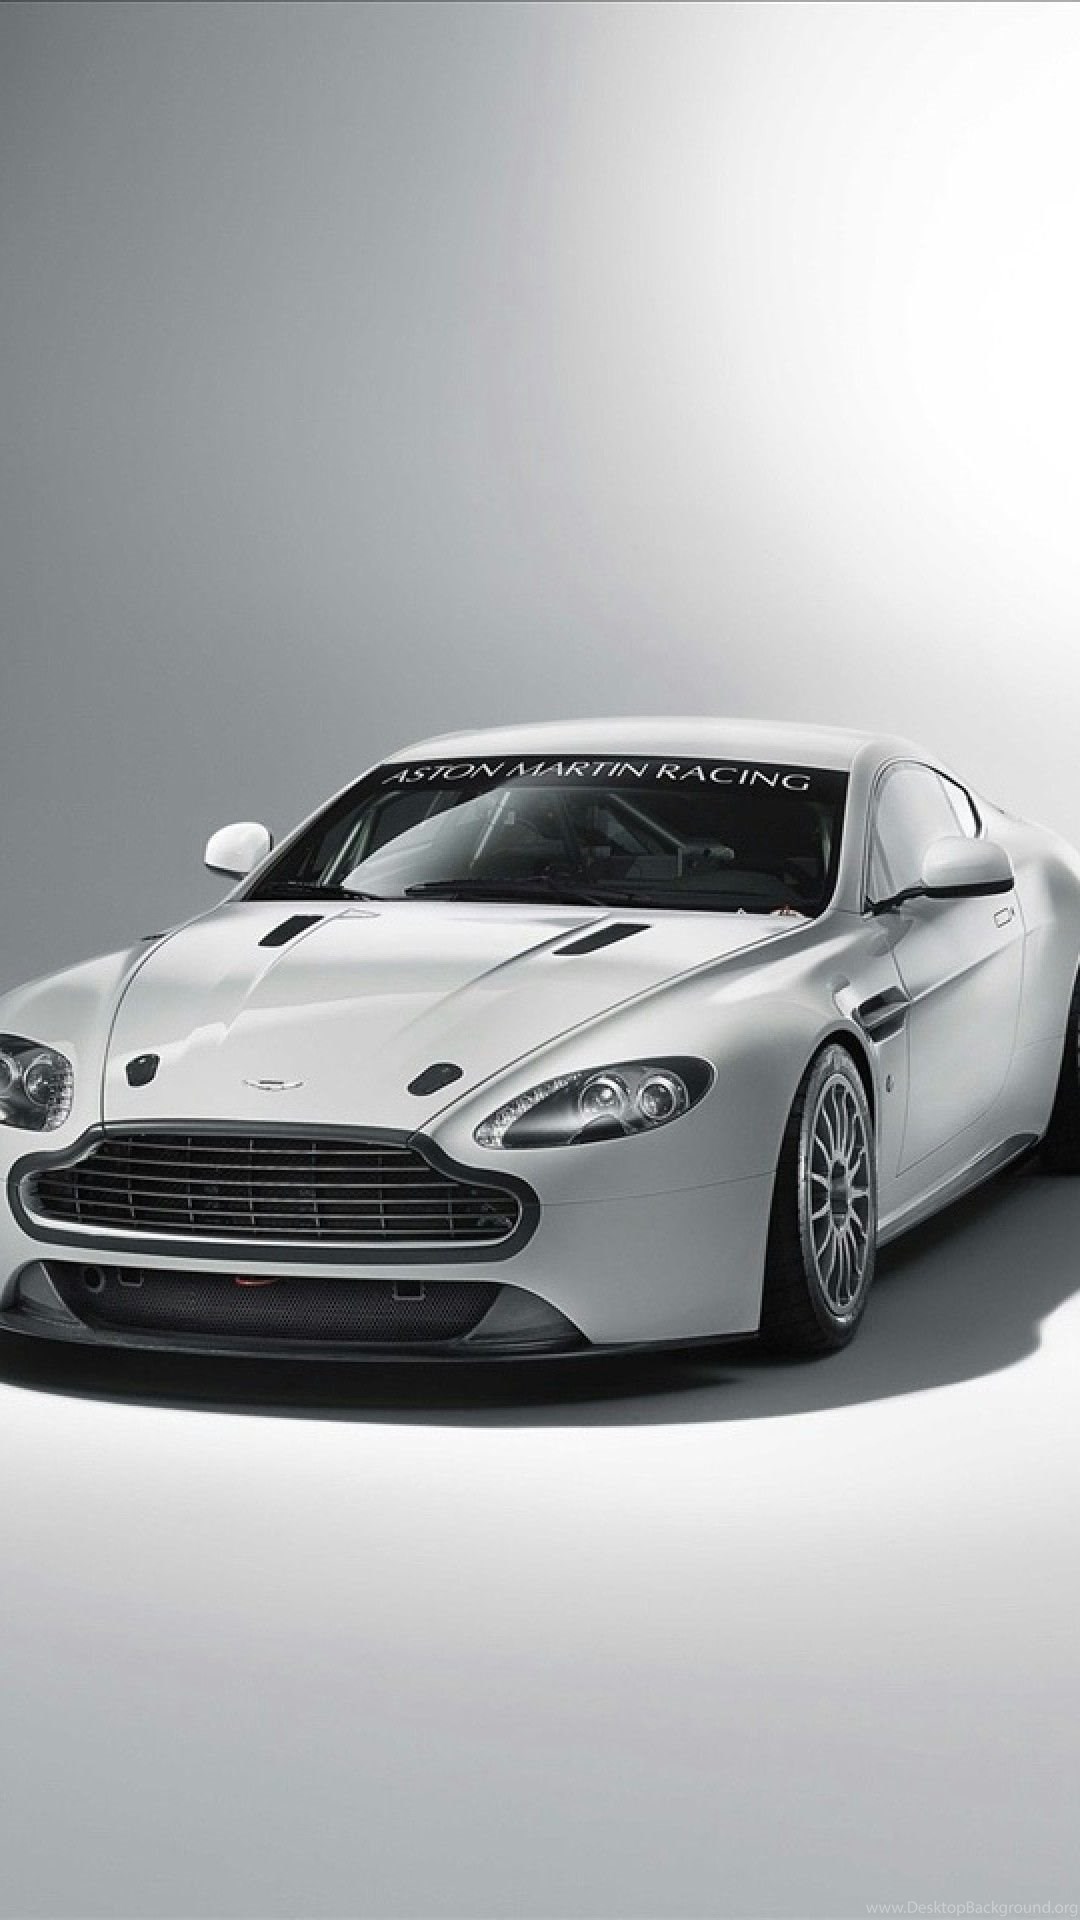 Aston Martin Racing Iphone 4 Wallpapers And Iphone 4s Wallpapers